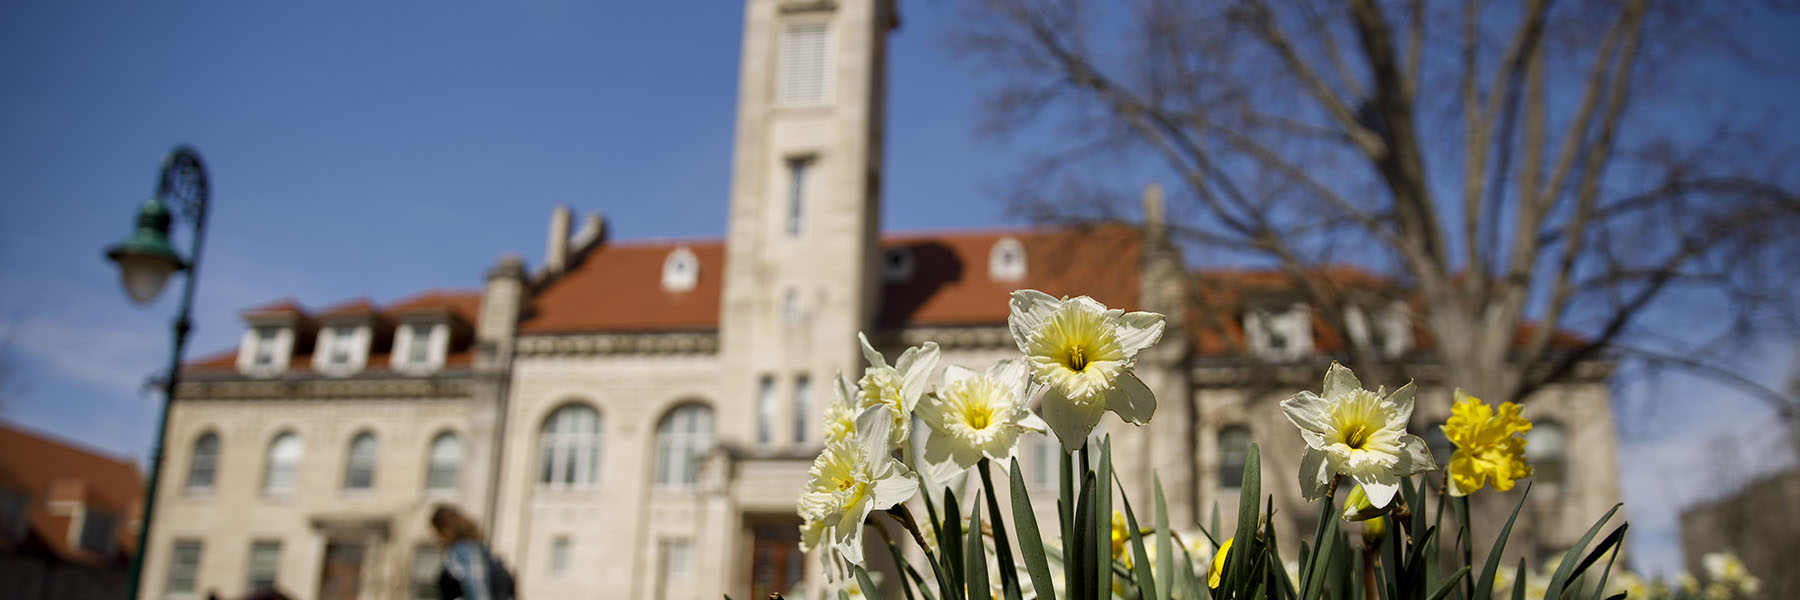 IU Bloomington Student Building in the background, out of focus. In the foreground, blooming daffodils.